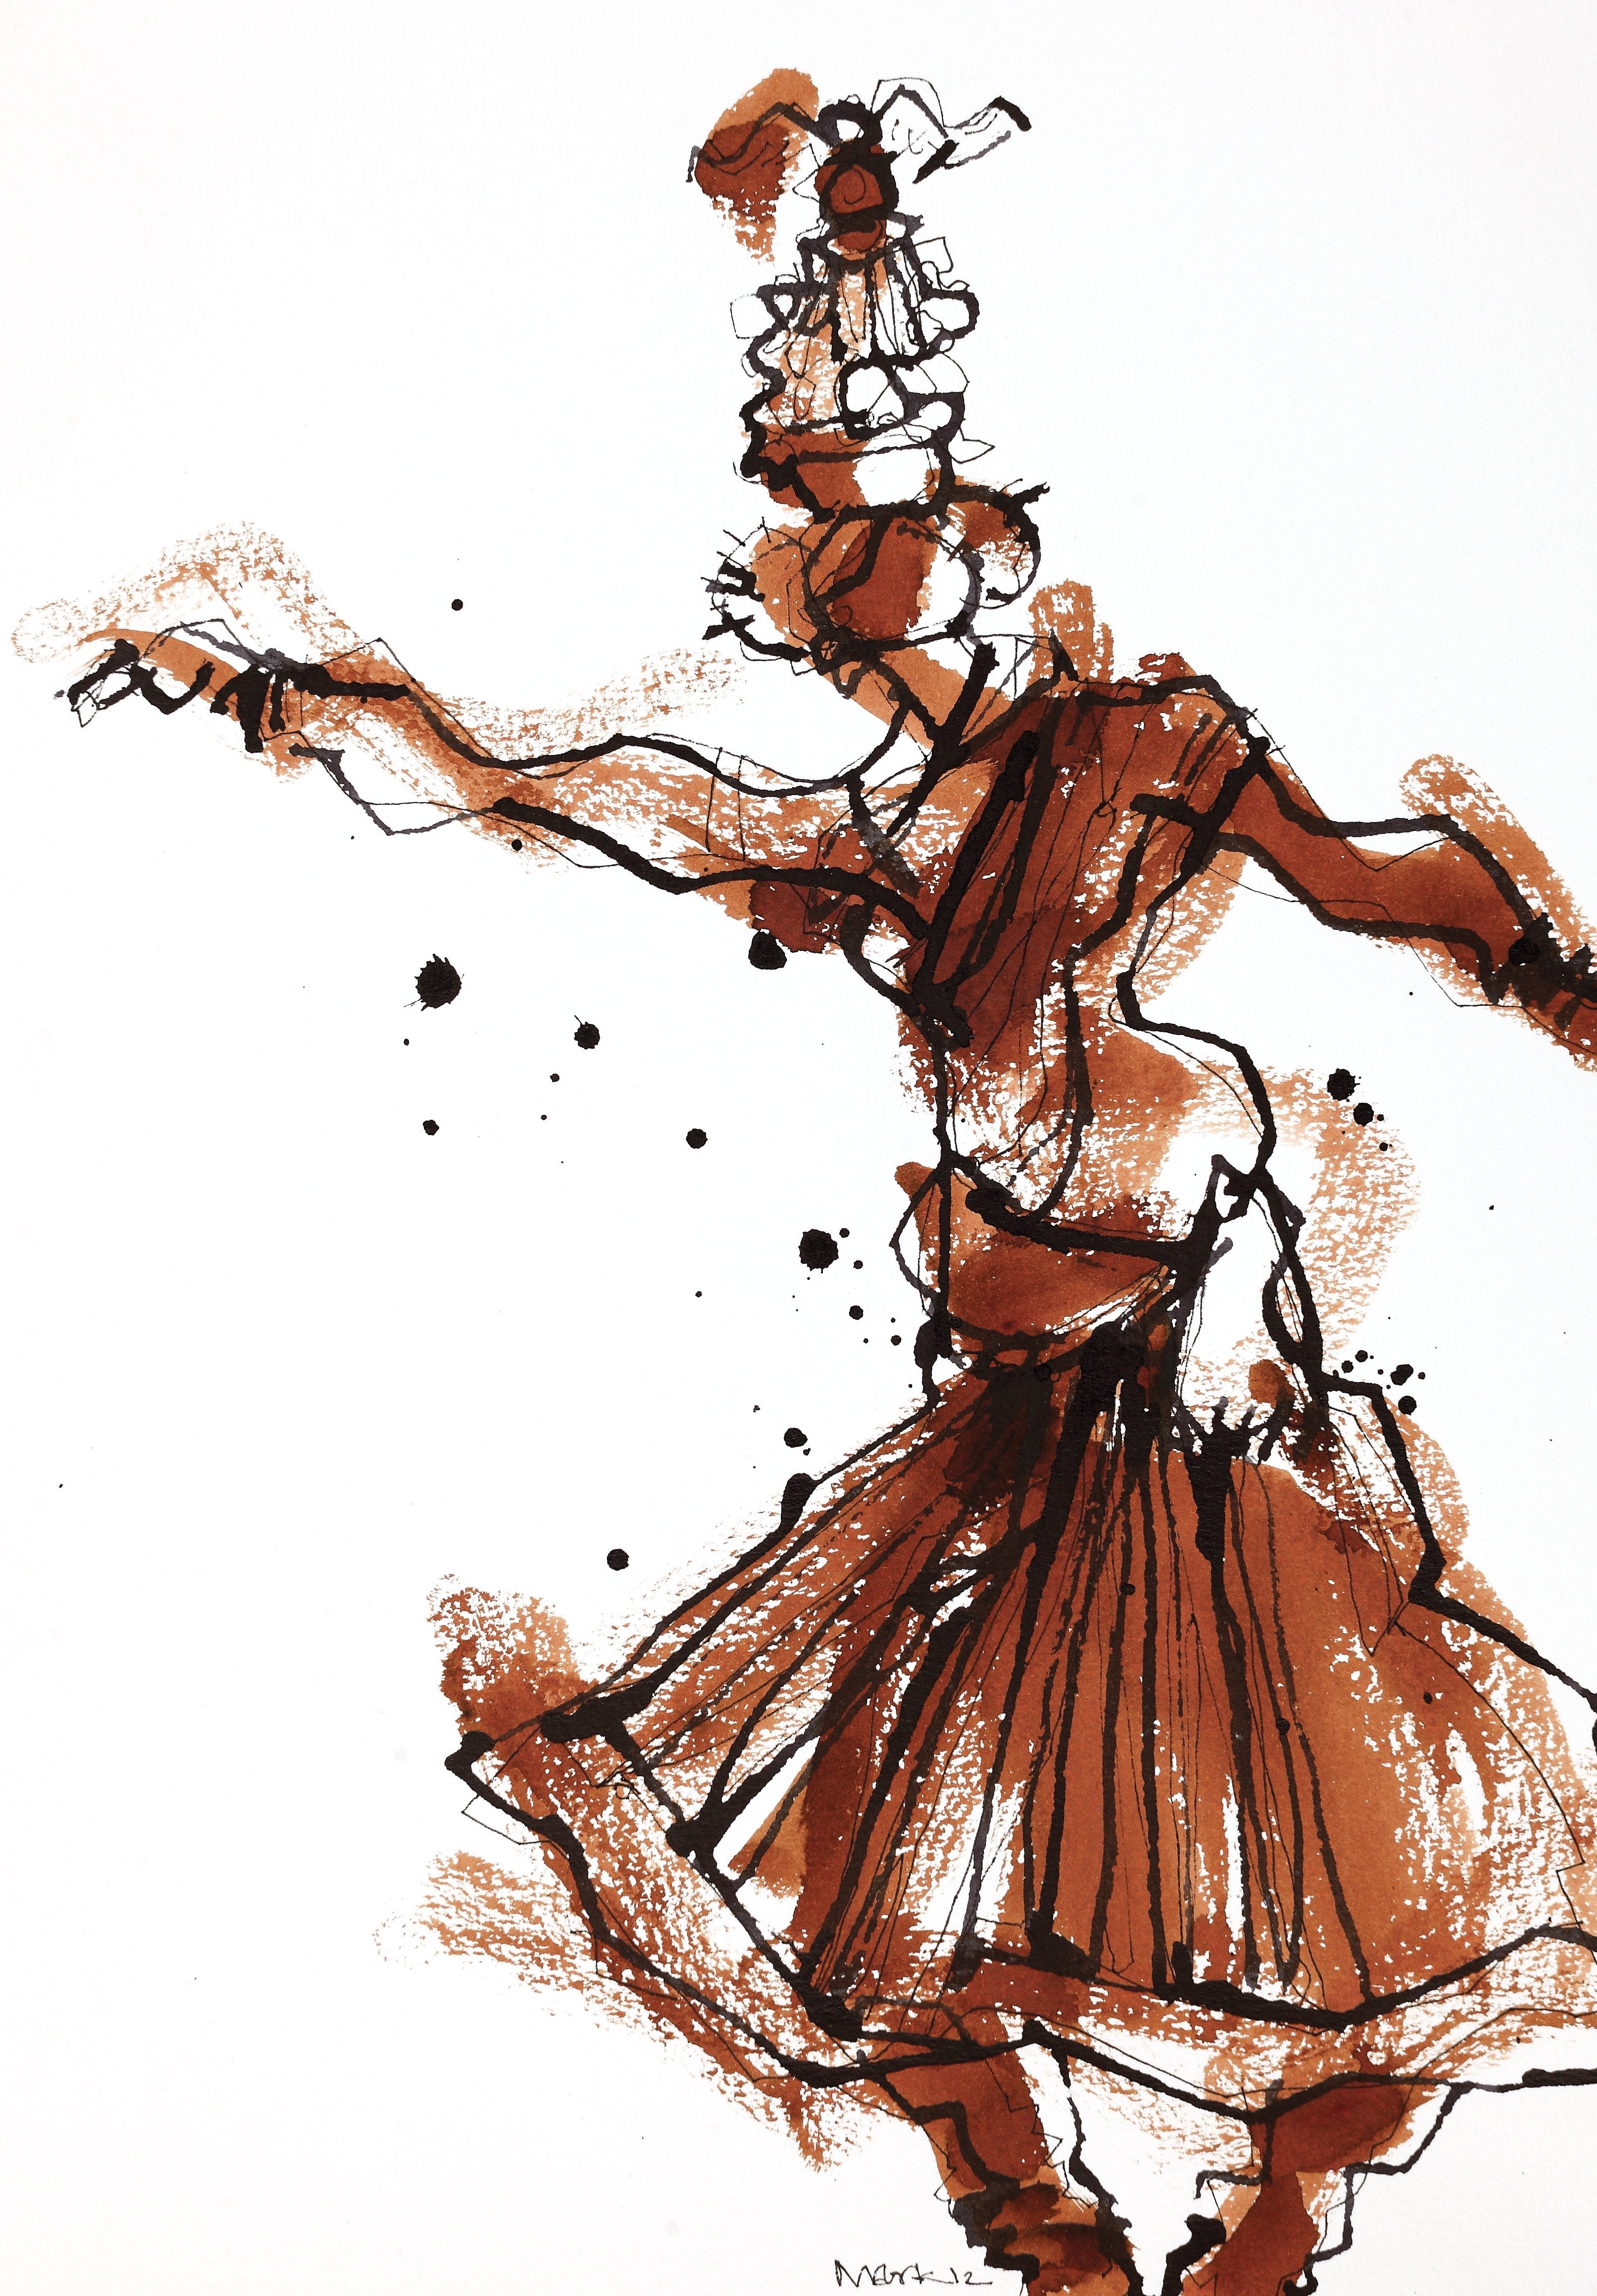 Performer 271|S. Mark Rathinaraj- Pen and Ink on Paper, , 11.5 x 8.25 inches